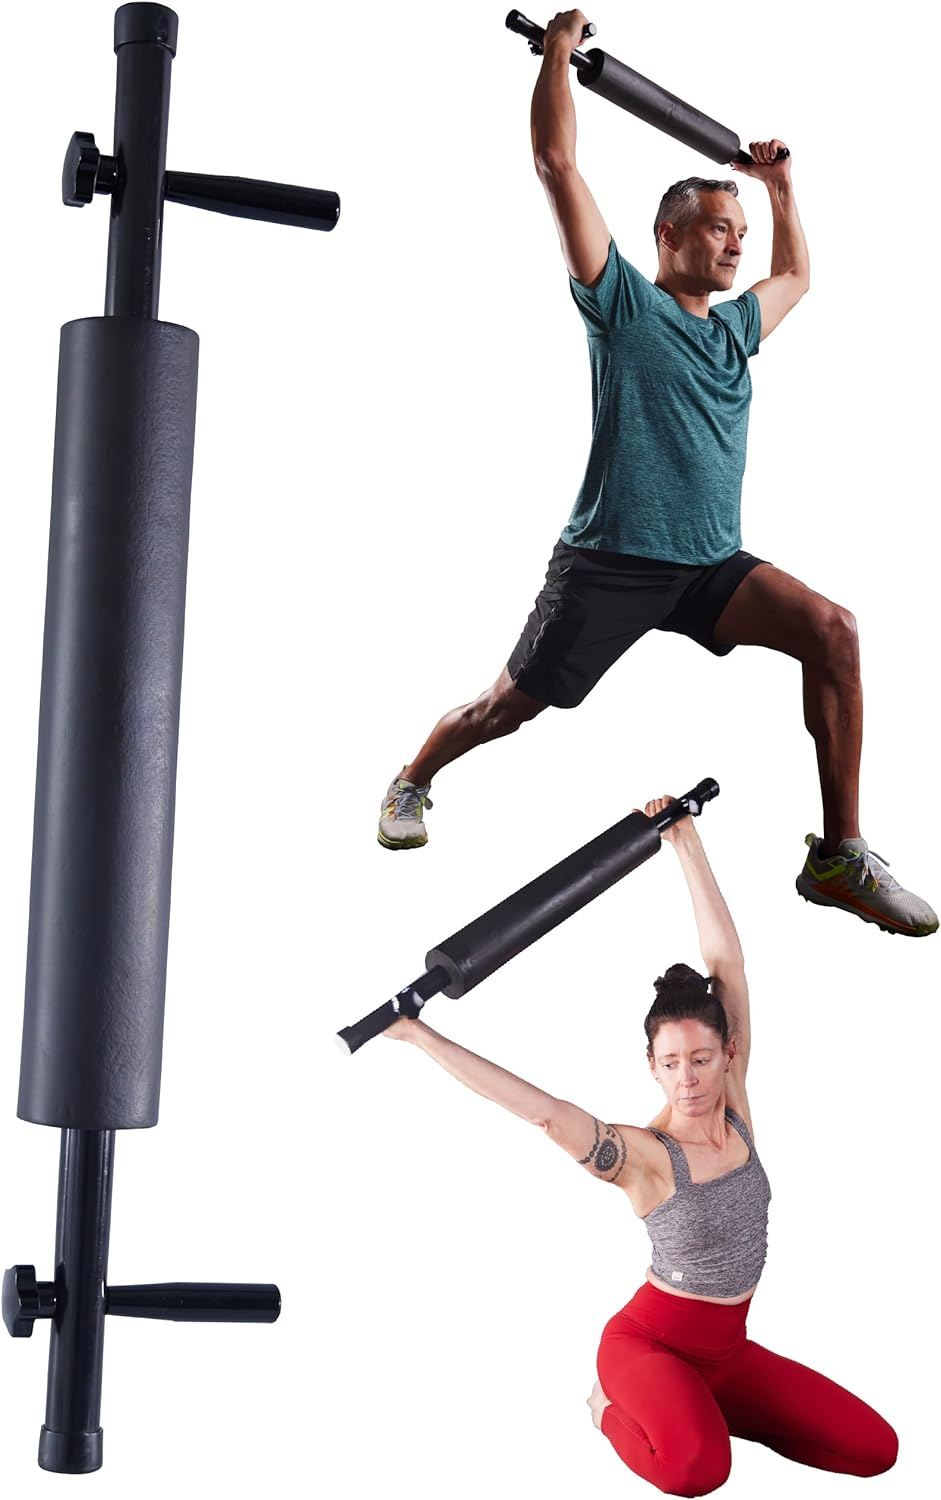 ROUNDBOX Fitness Mantis Grappler, The All-in-One Exercise Bar for Core, Upper Body, and Functional Strength Training - Perfect Accessory for Home Fitness, Bodybuilding, and Isometric Workouts